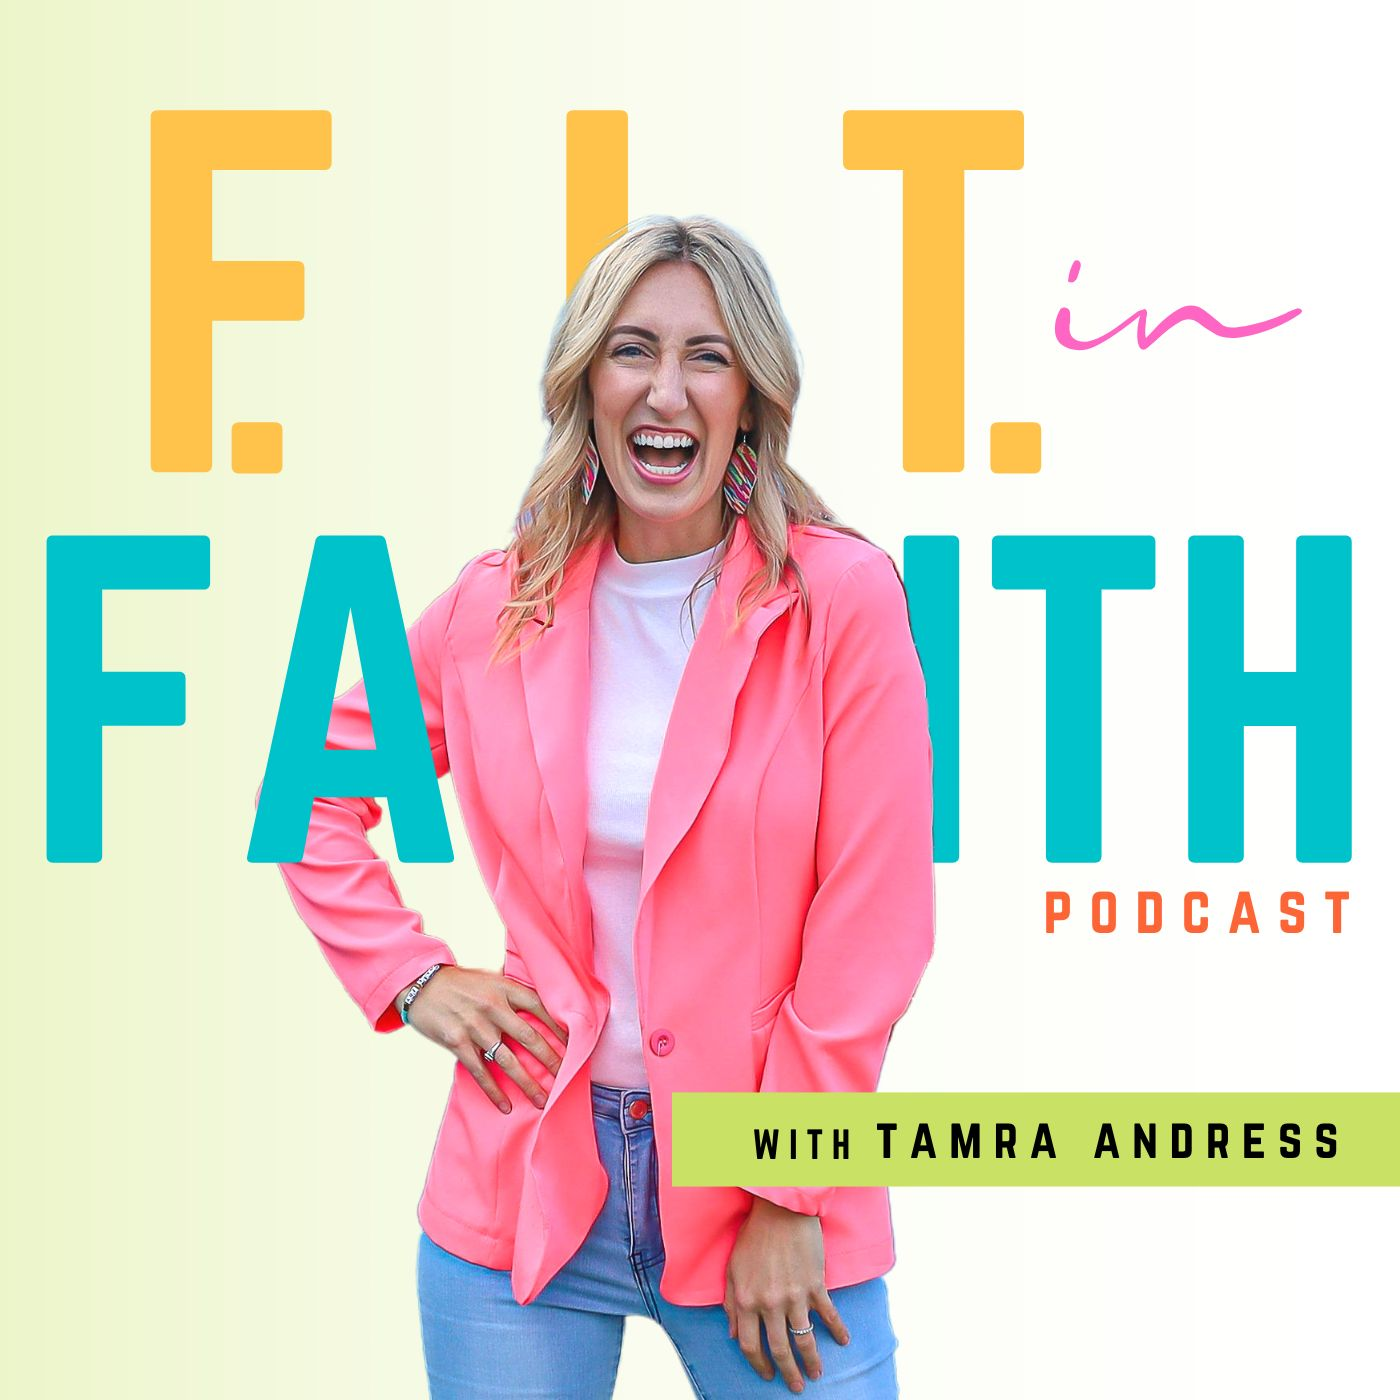 Ep 424: UnleashYour Voice & Fulfill the Great Commission | Tamra Andress